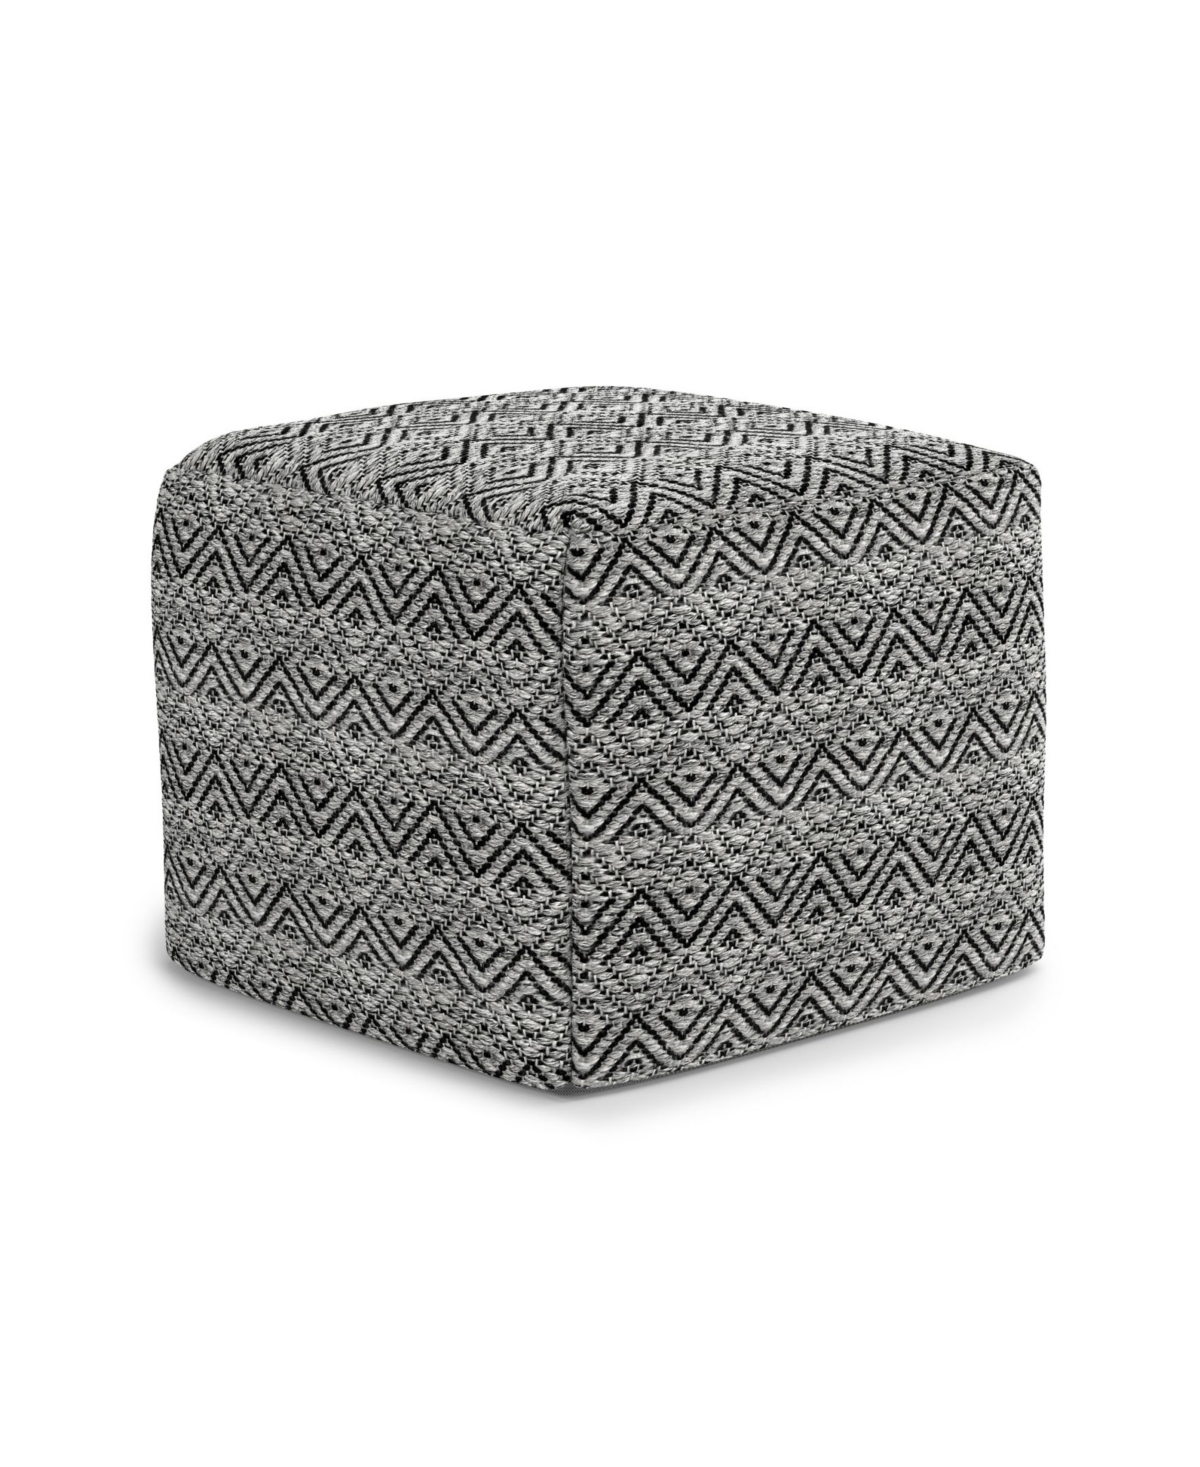 Macy's Hendrik Square Woven Outdoor And Indoor Pouf In Gray,black